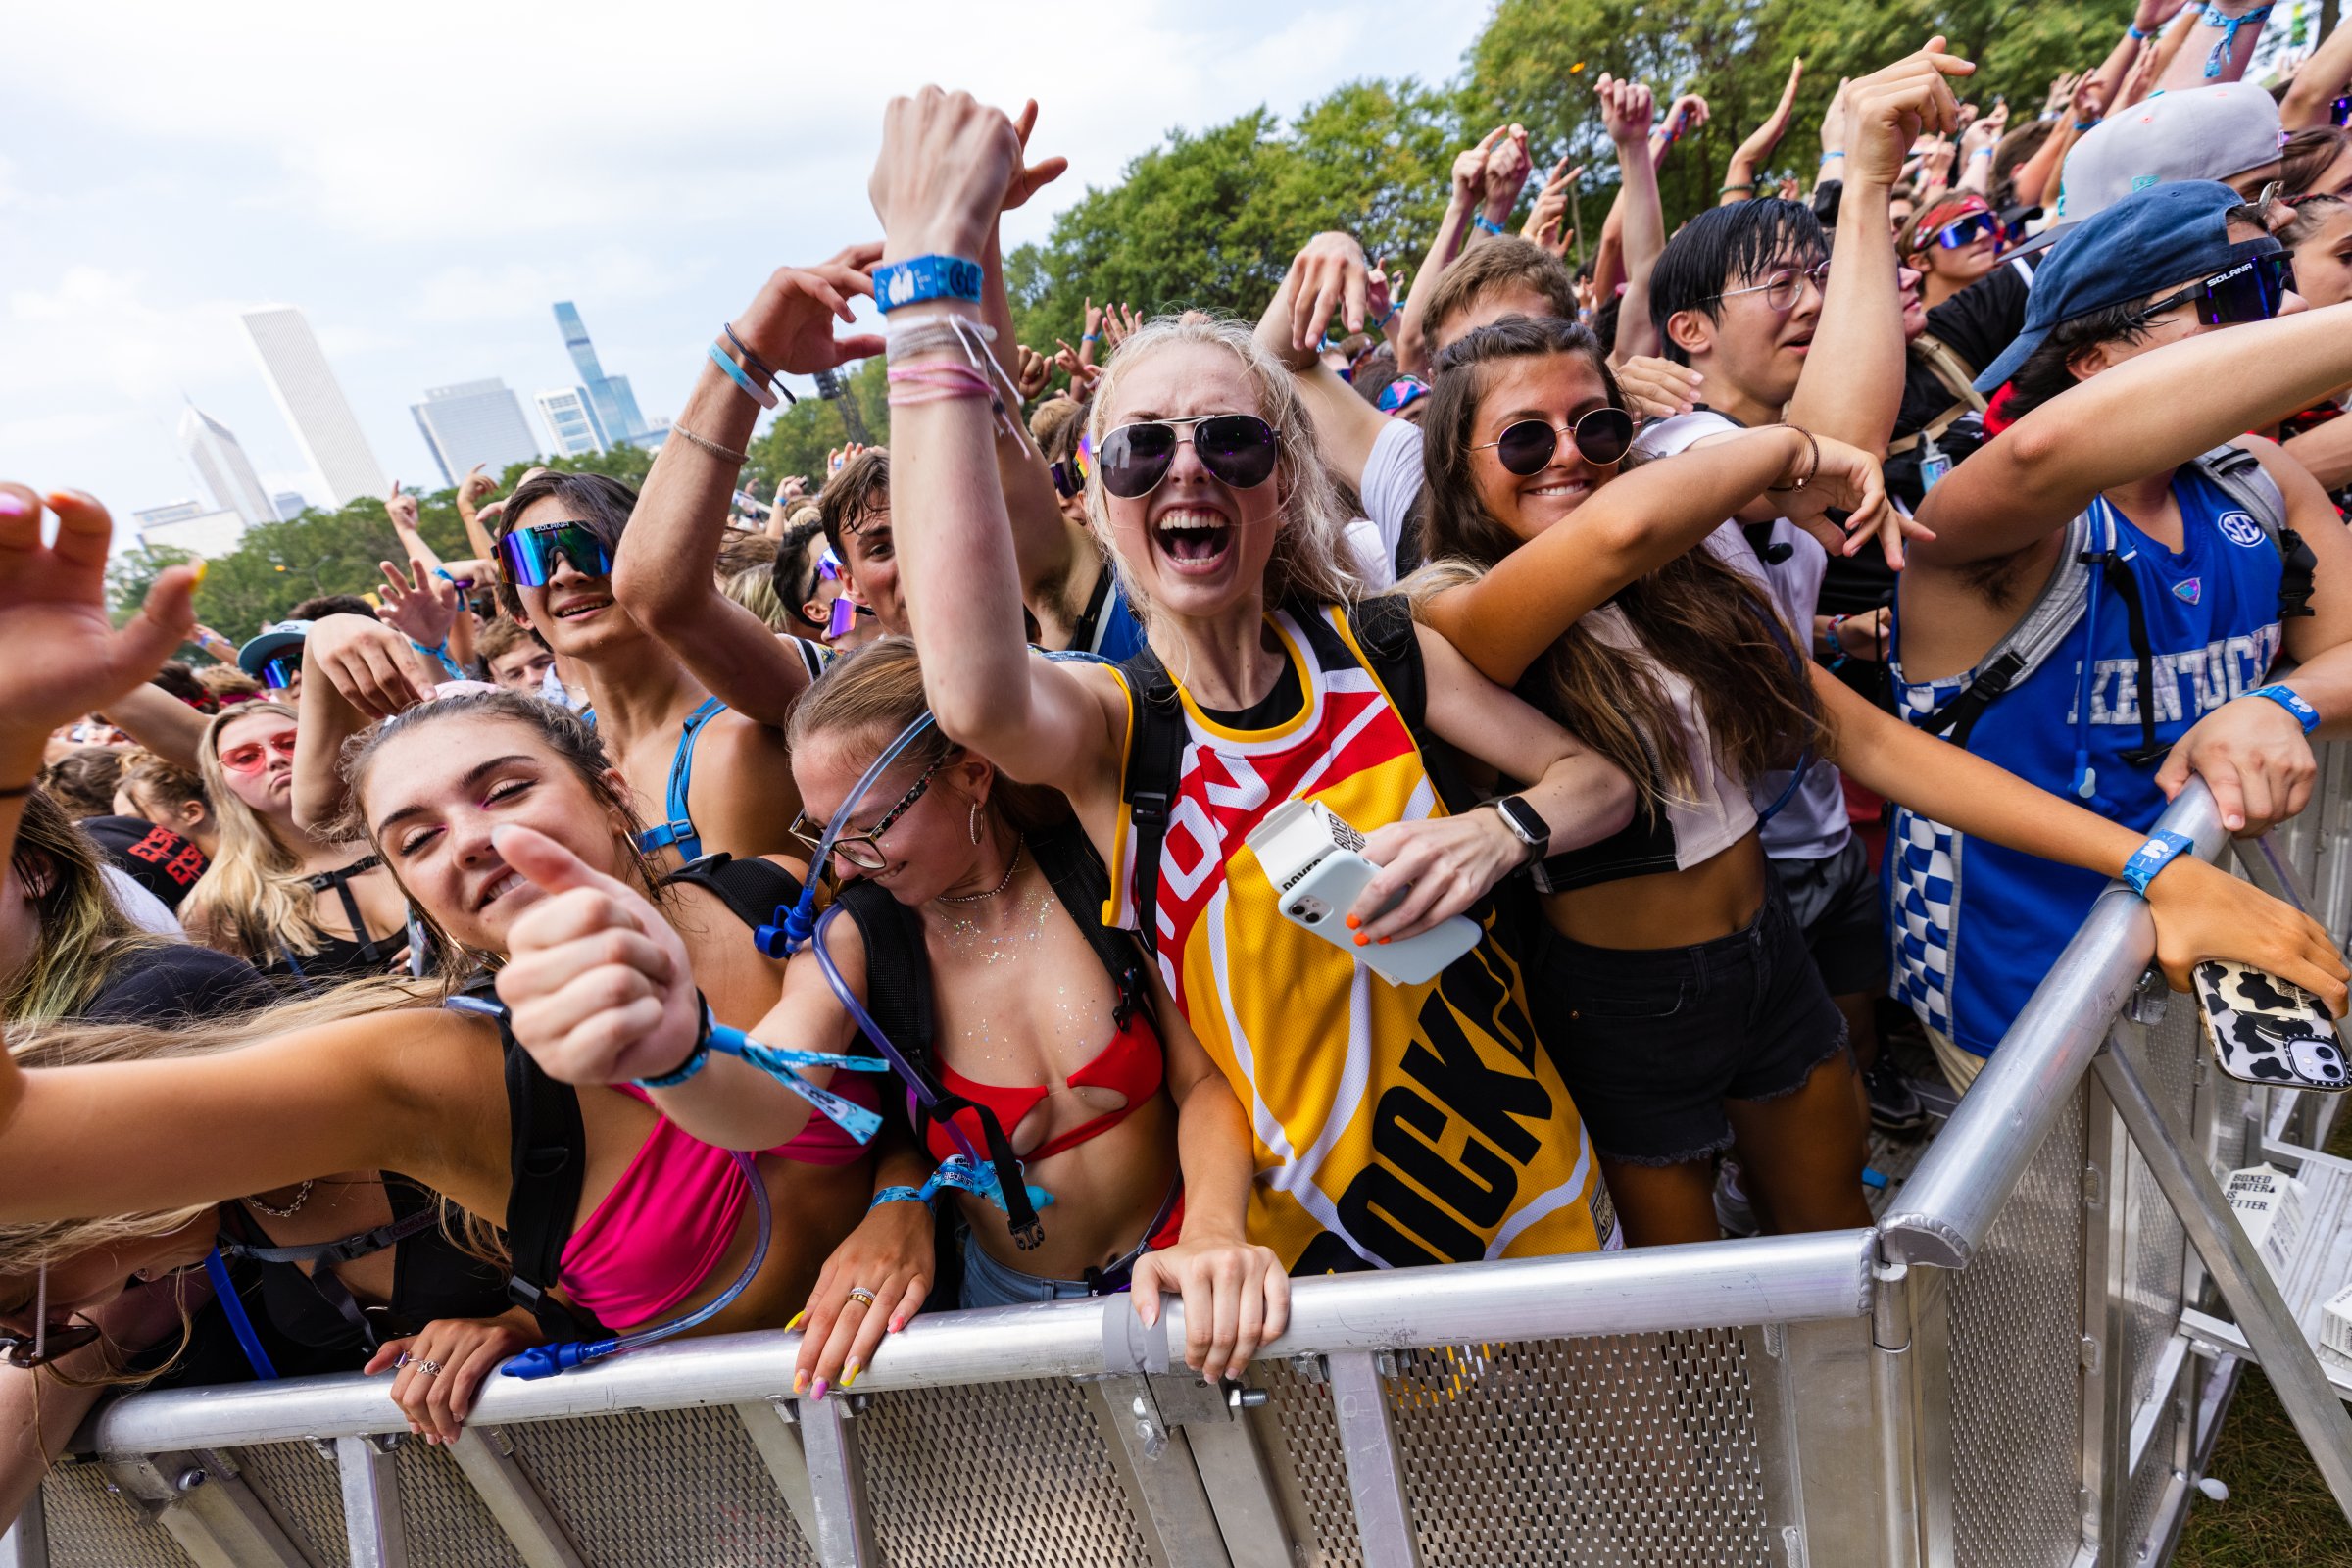 Fans at the first day of Lollapalooza 2021 in Chicago.